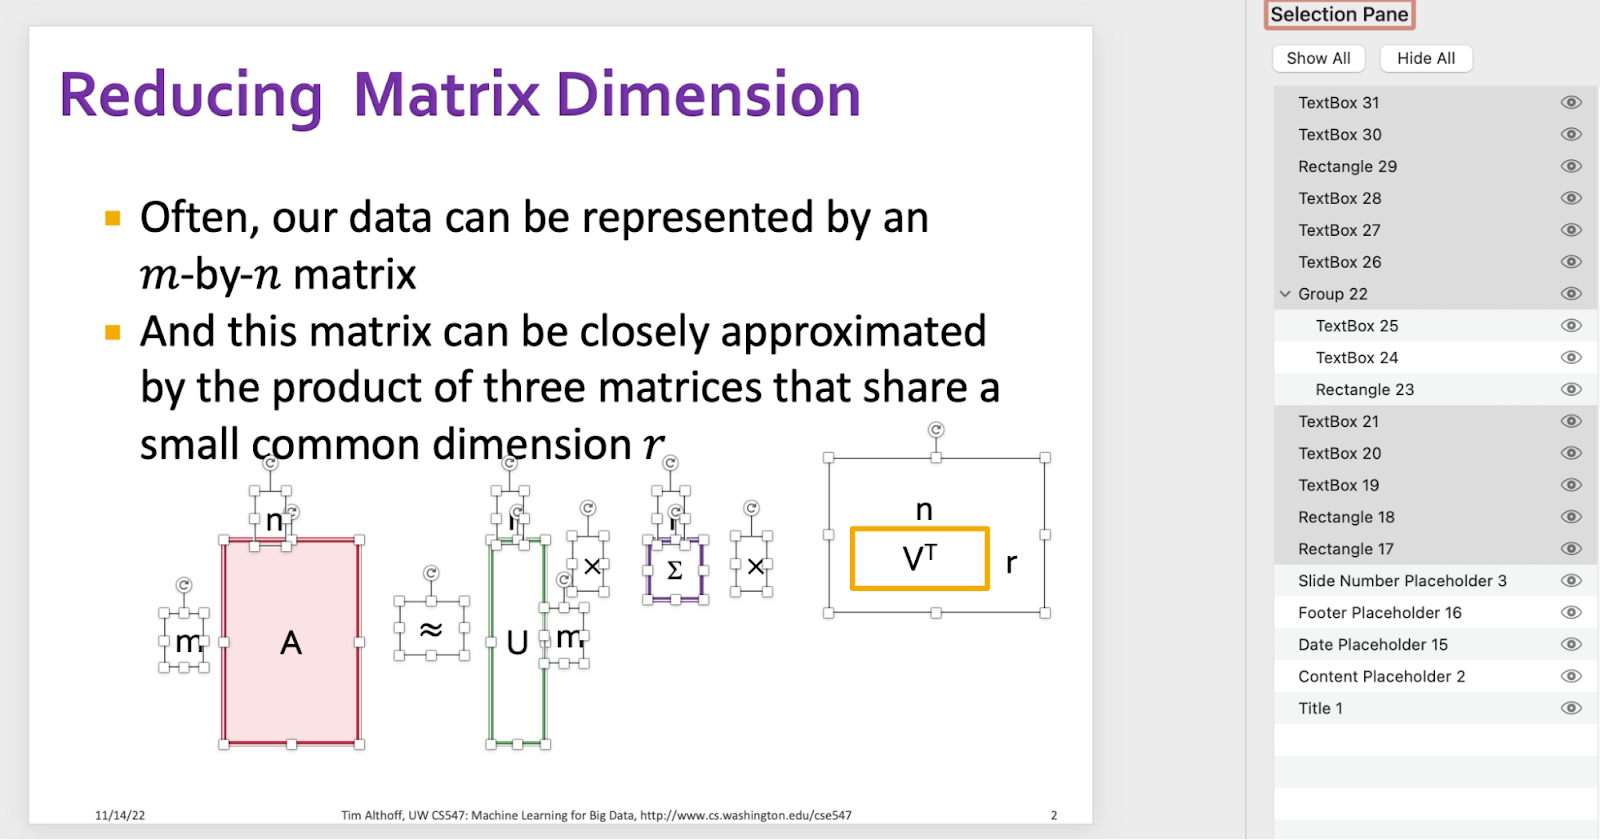 This is a screenshot of a PowerPoint slide and the Selection Pane. On the left, there is a PowerPoint slide titled "Reducing Matrix Dimension", followed by text description, and then followed by math equation A \approx U \Sigma V^T. All three components are laid out in matrix format to make it easy to comprehend. The rows and columns numbers are denoted in various numbers. on the right is the "Selection Pane" pane. In the pane, 11 textboxes of the components from the left slide are selected. 